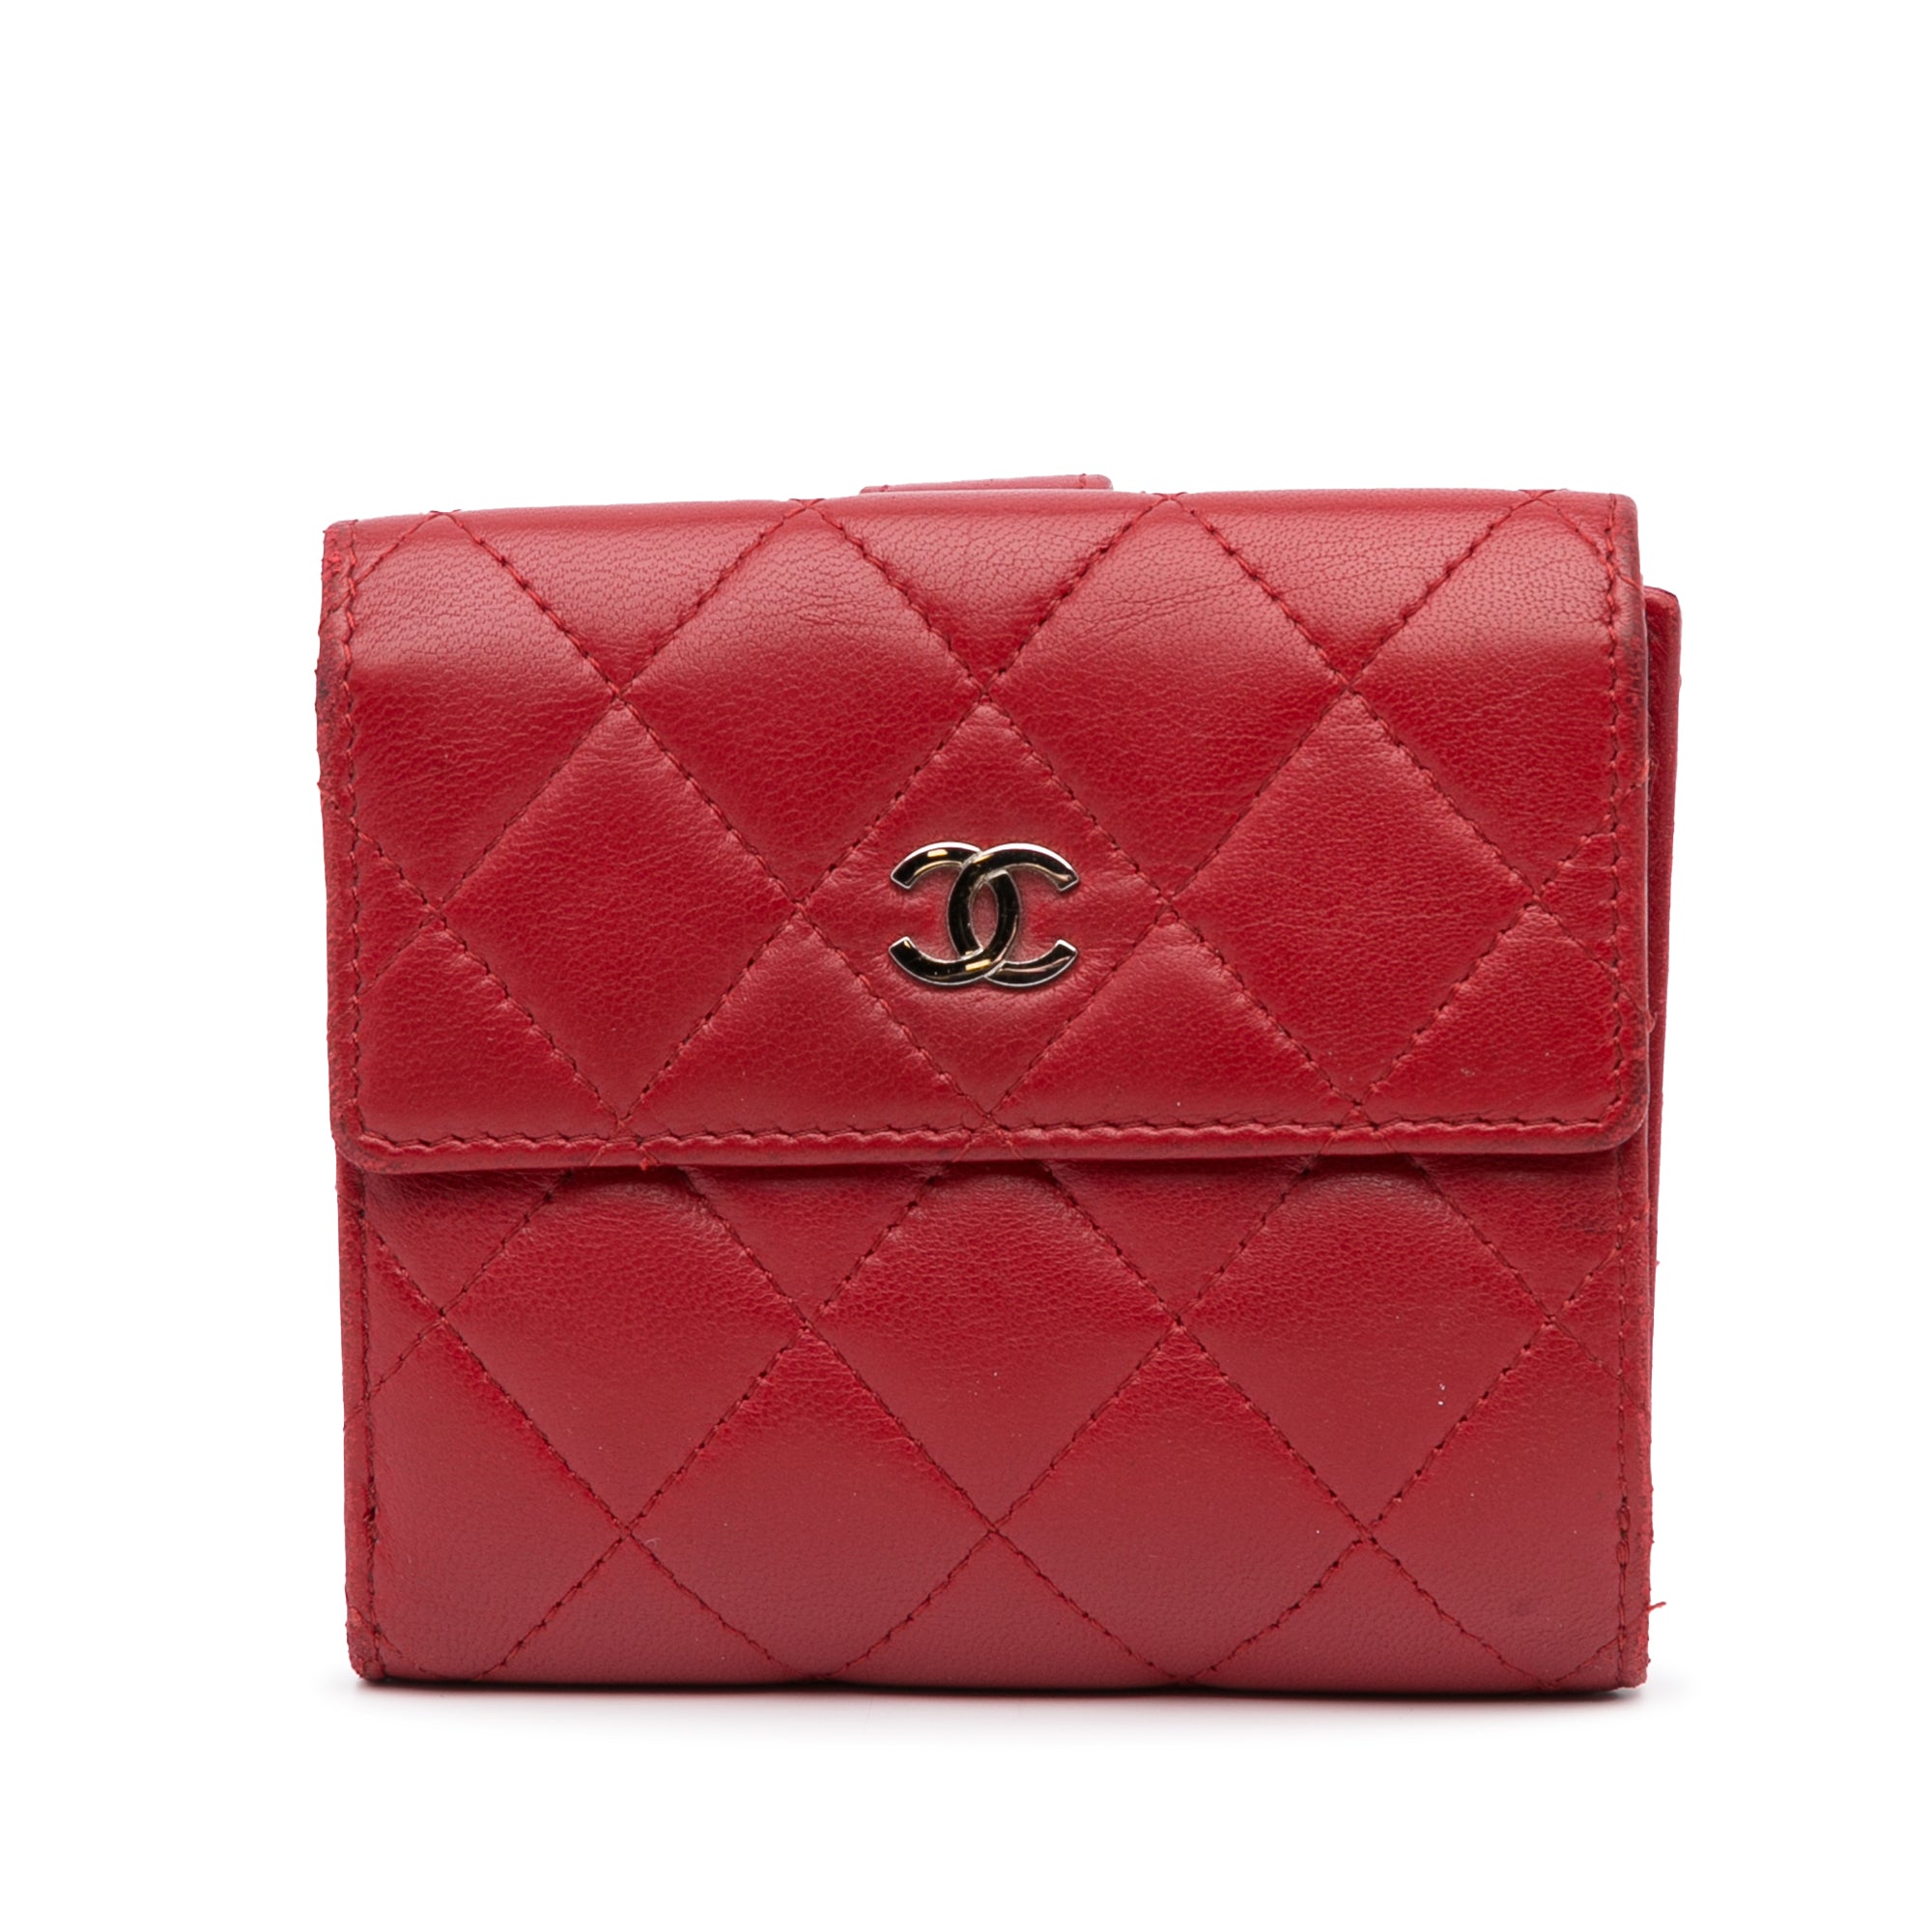 Red Chanel CC Matelasse Small Wallet, RvceShops Revival